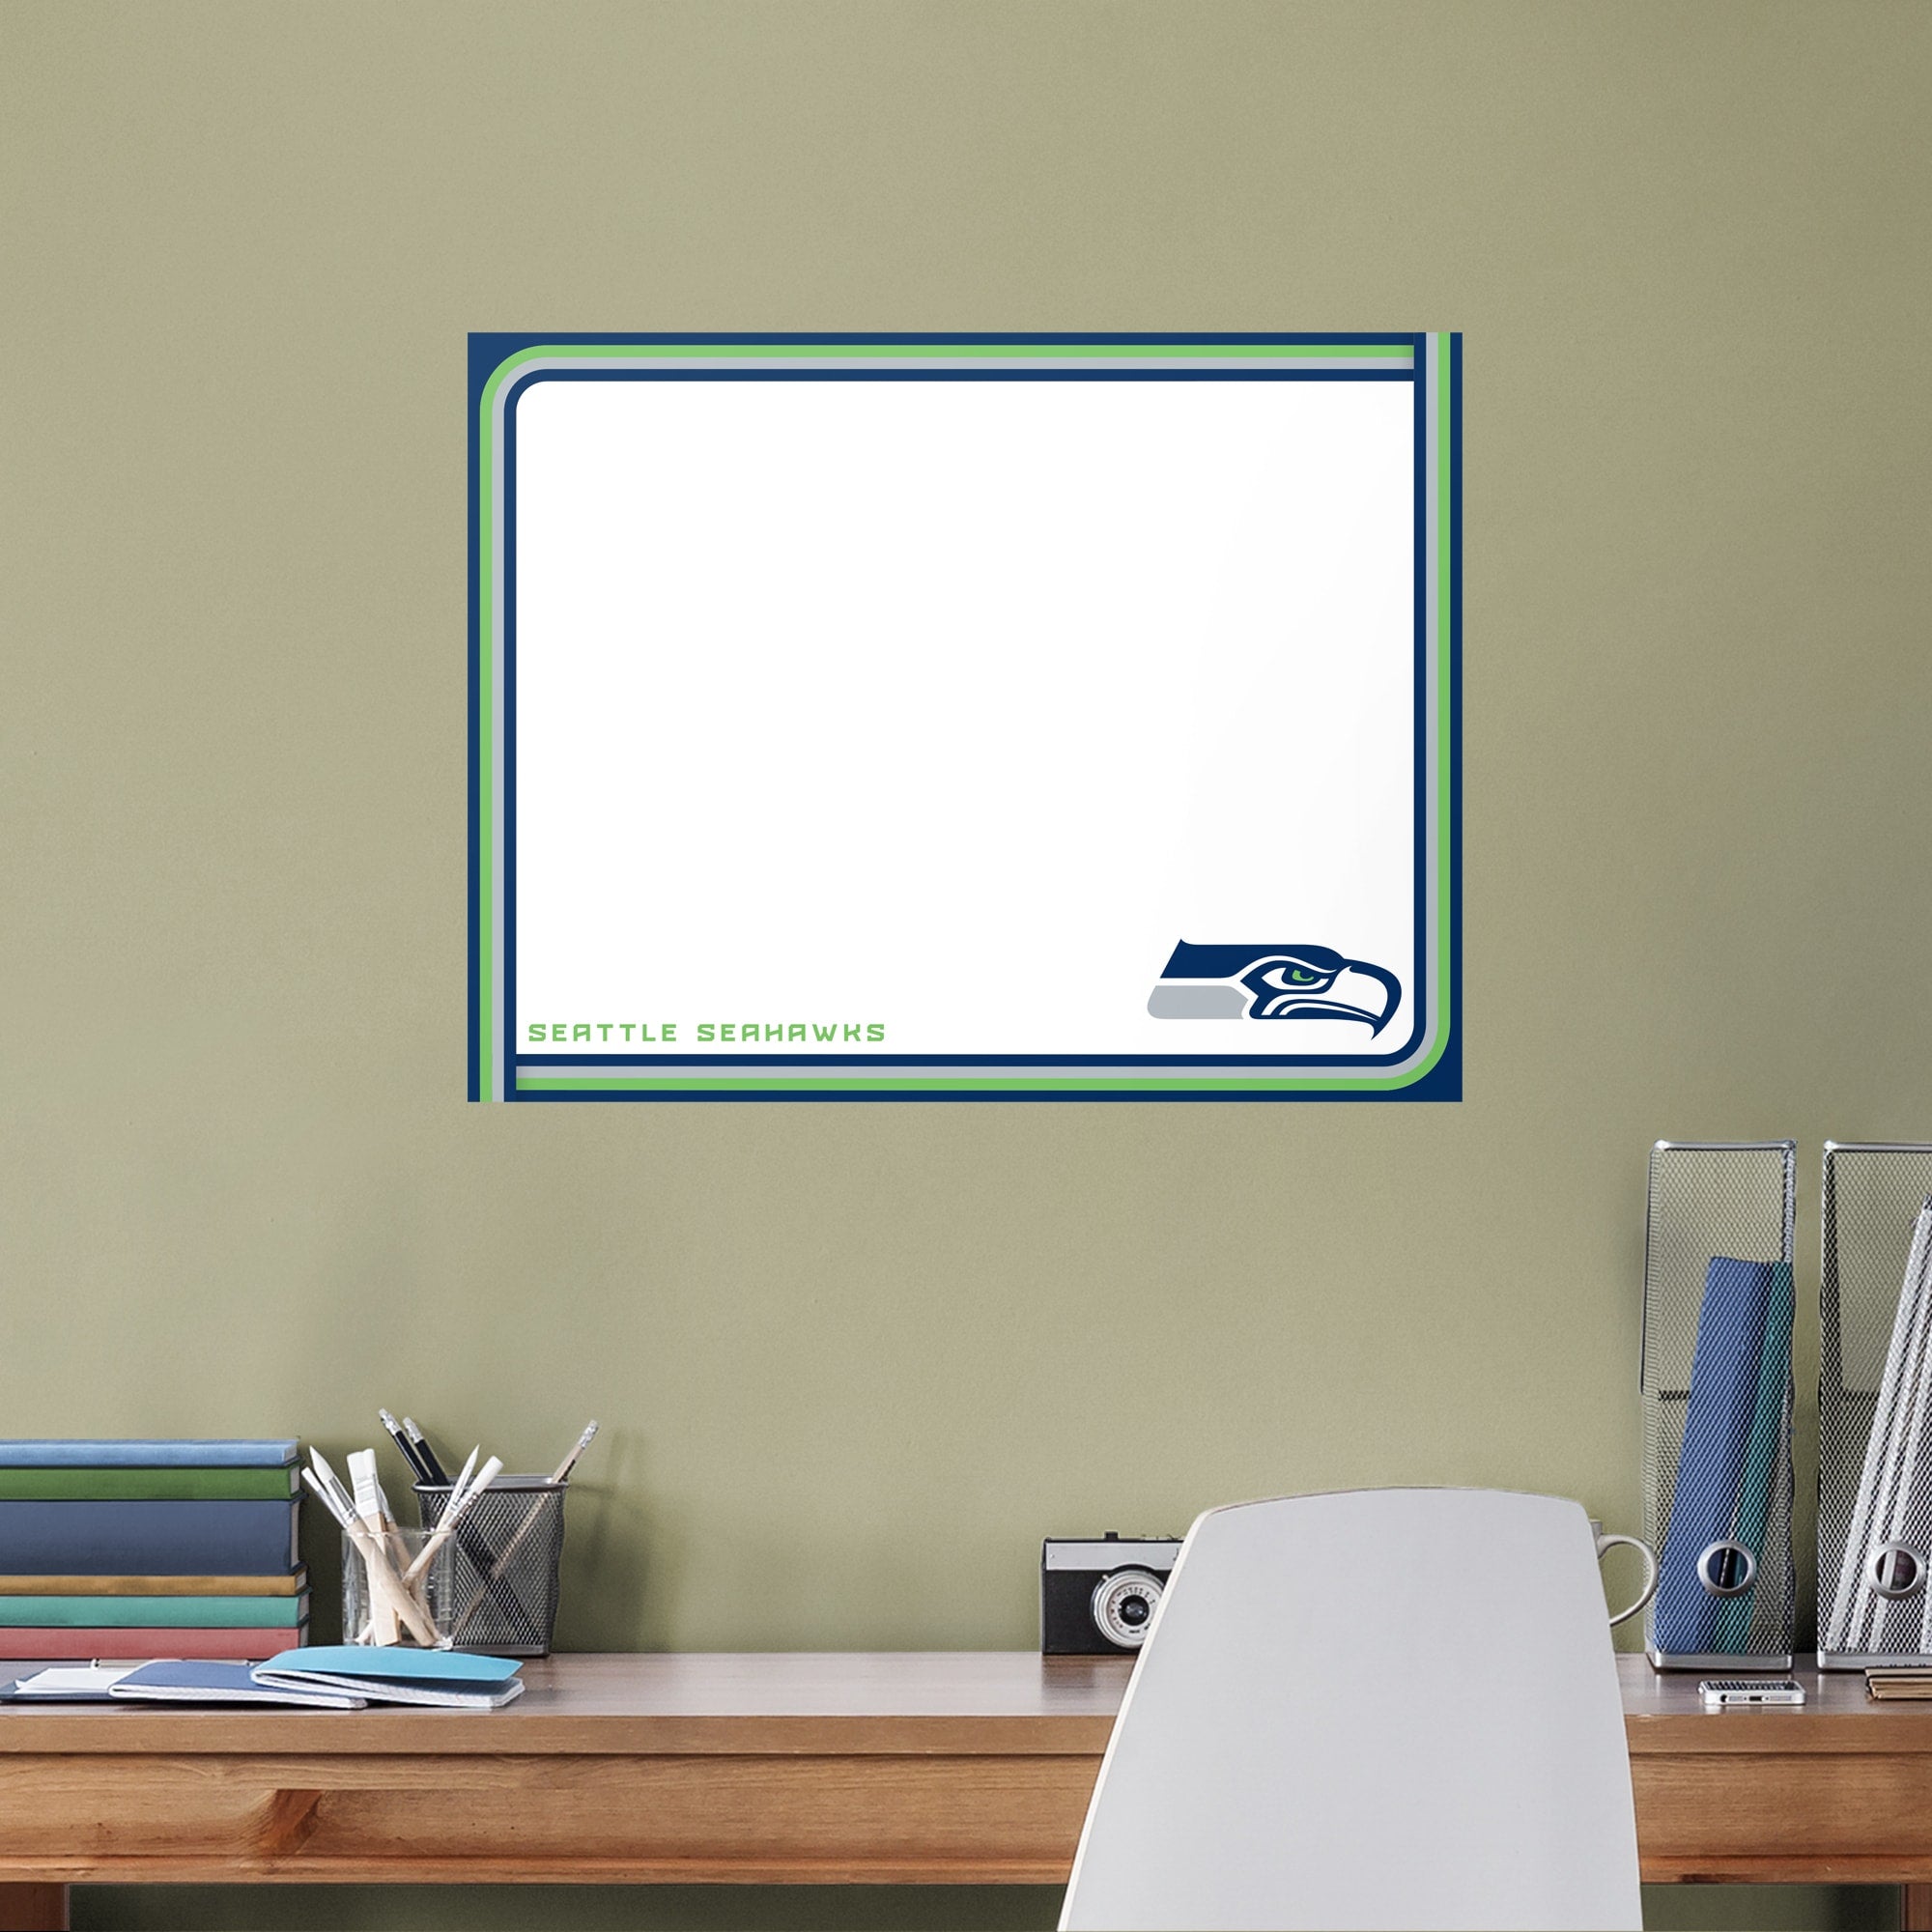 Seattle Seahawks: Dry Erase Whiteboard - Officially Licensed NFL Removable Wall Decal XL by Fathead | Vinyl